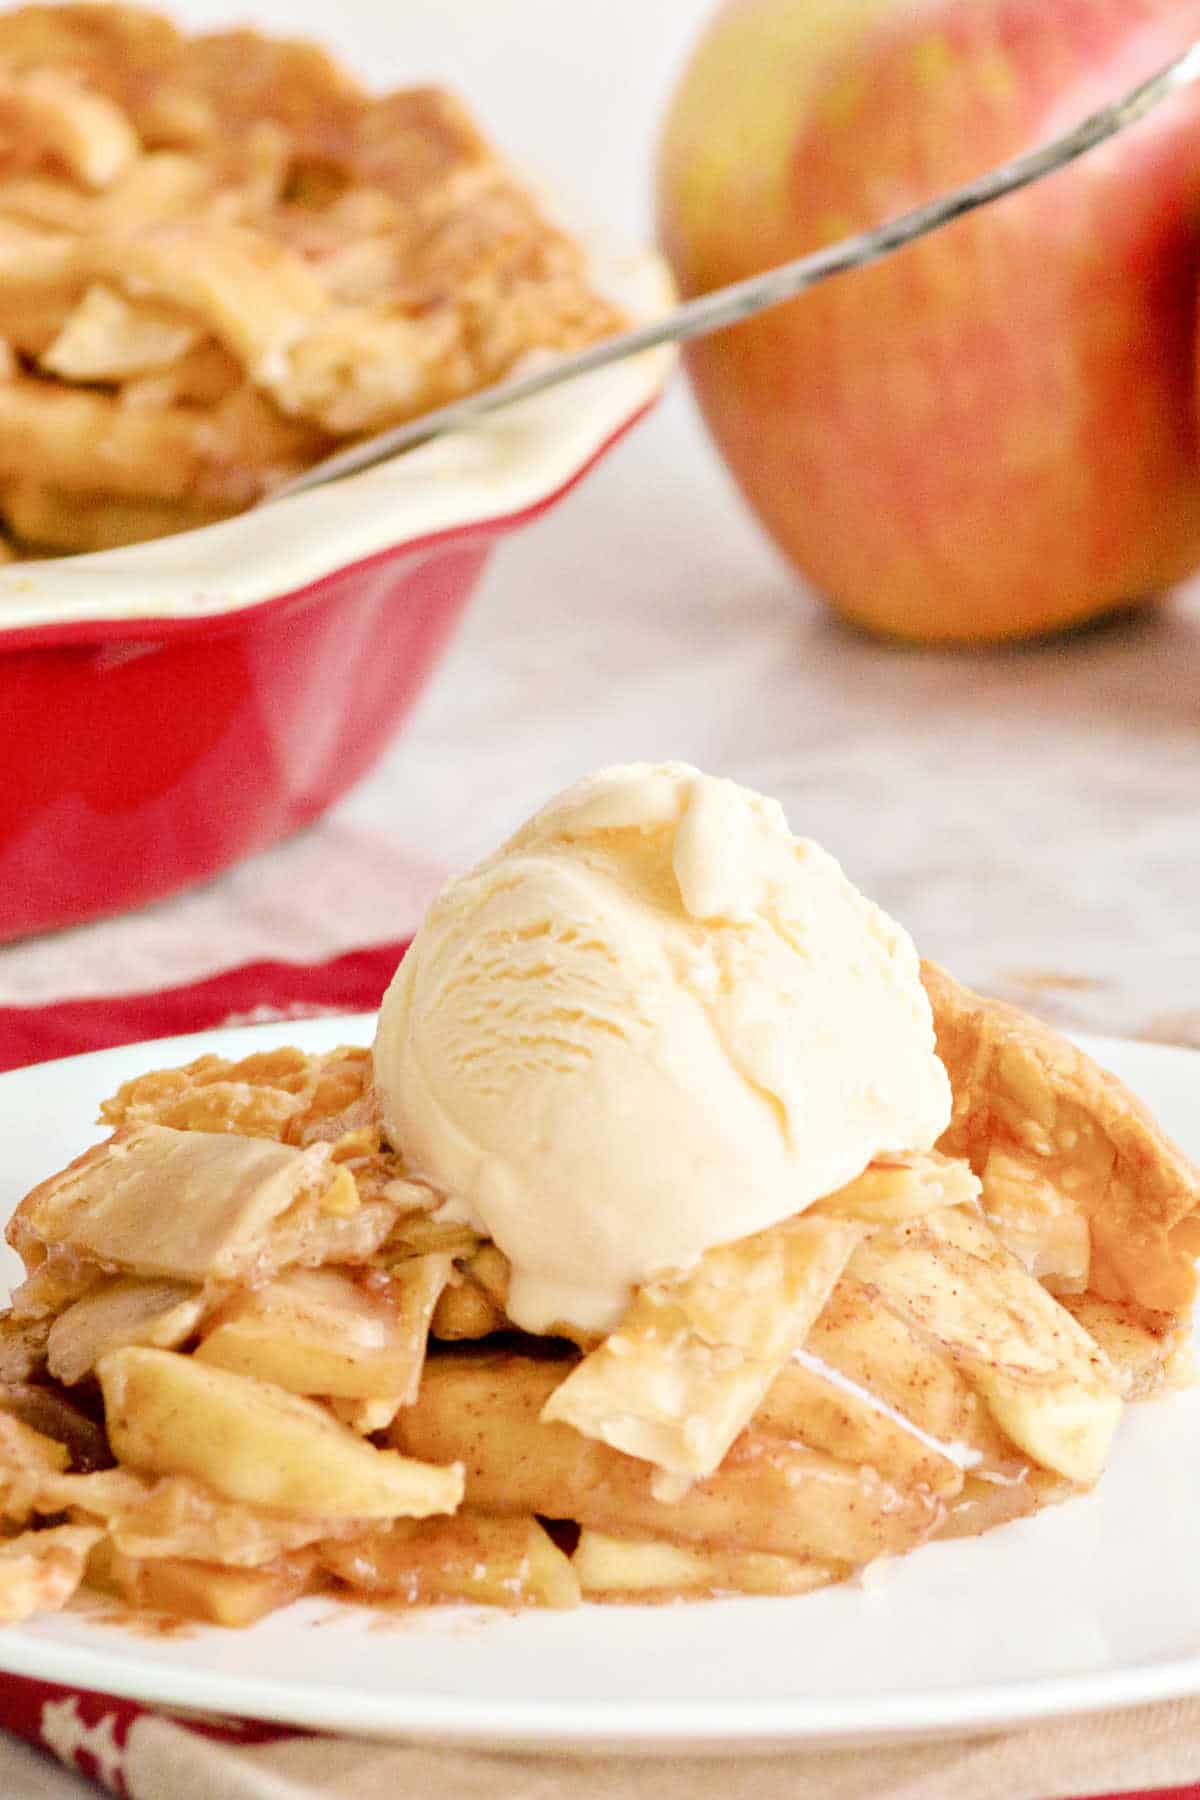 a slice of country apple pie dished out on a plate with a scoop of ice cream on top